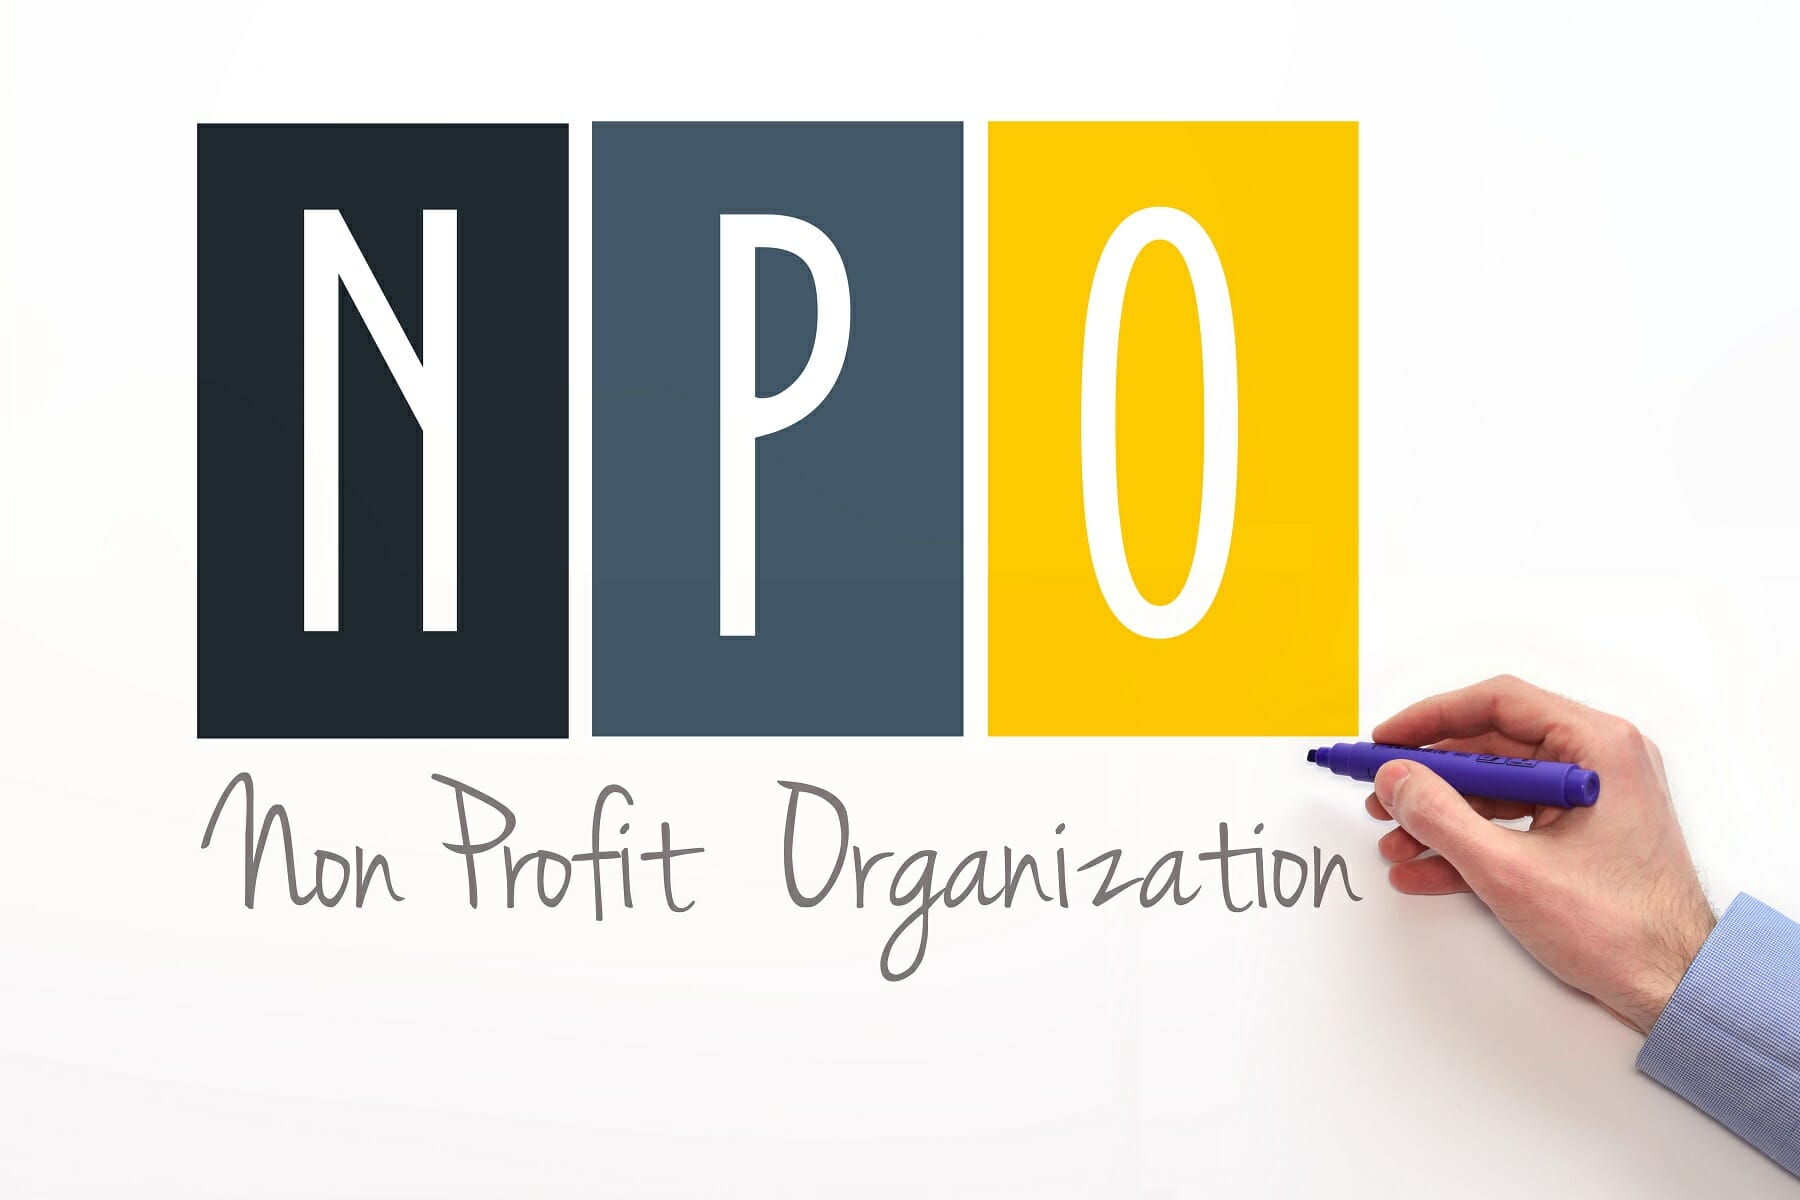 How to Start a Non-Profit Organization - Overview and Key Considerations